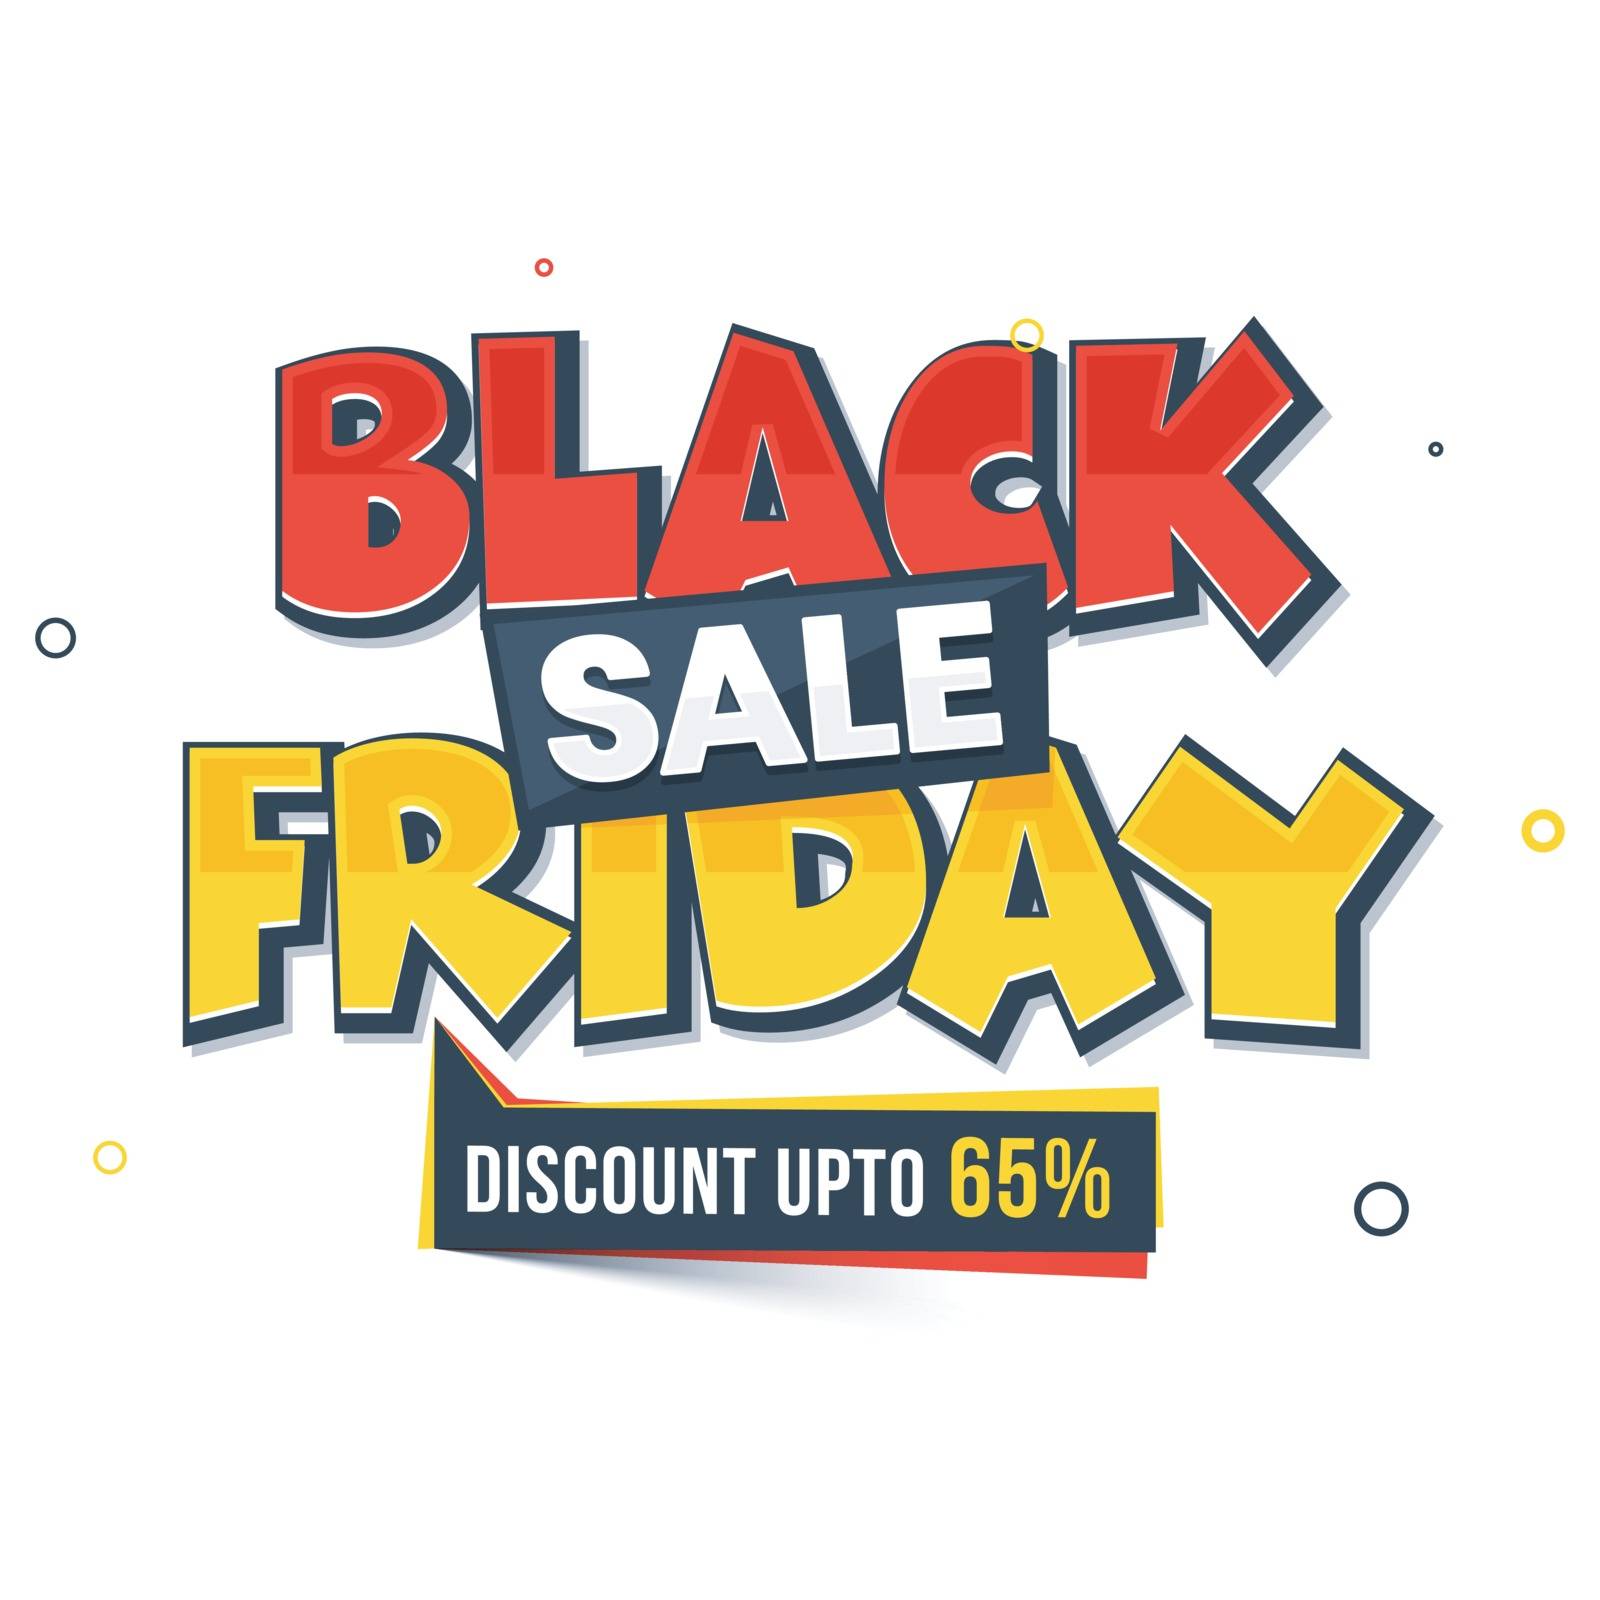 Black Friday Sale template or flyer design with 65% discount off by aispl